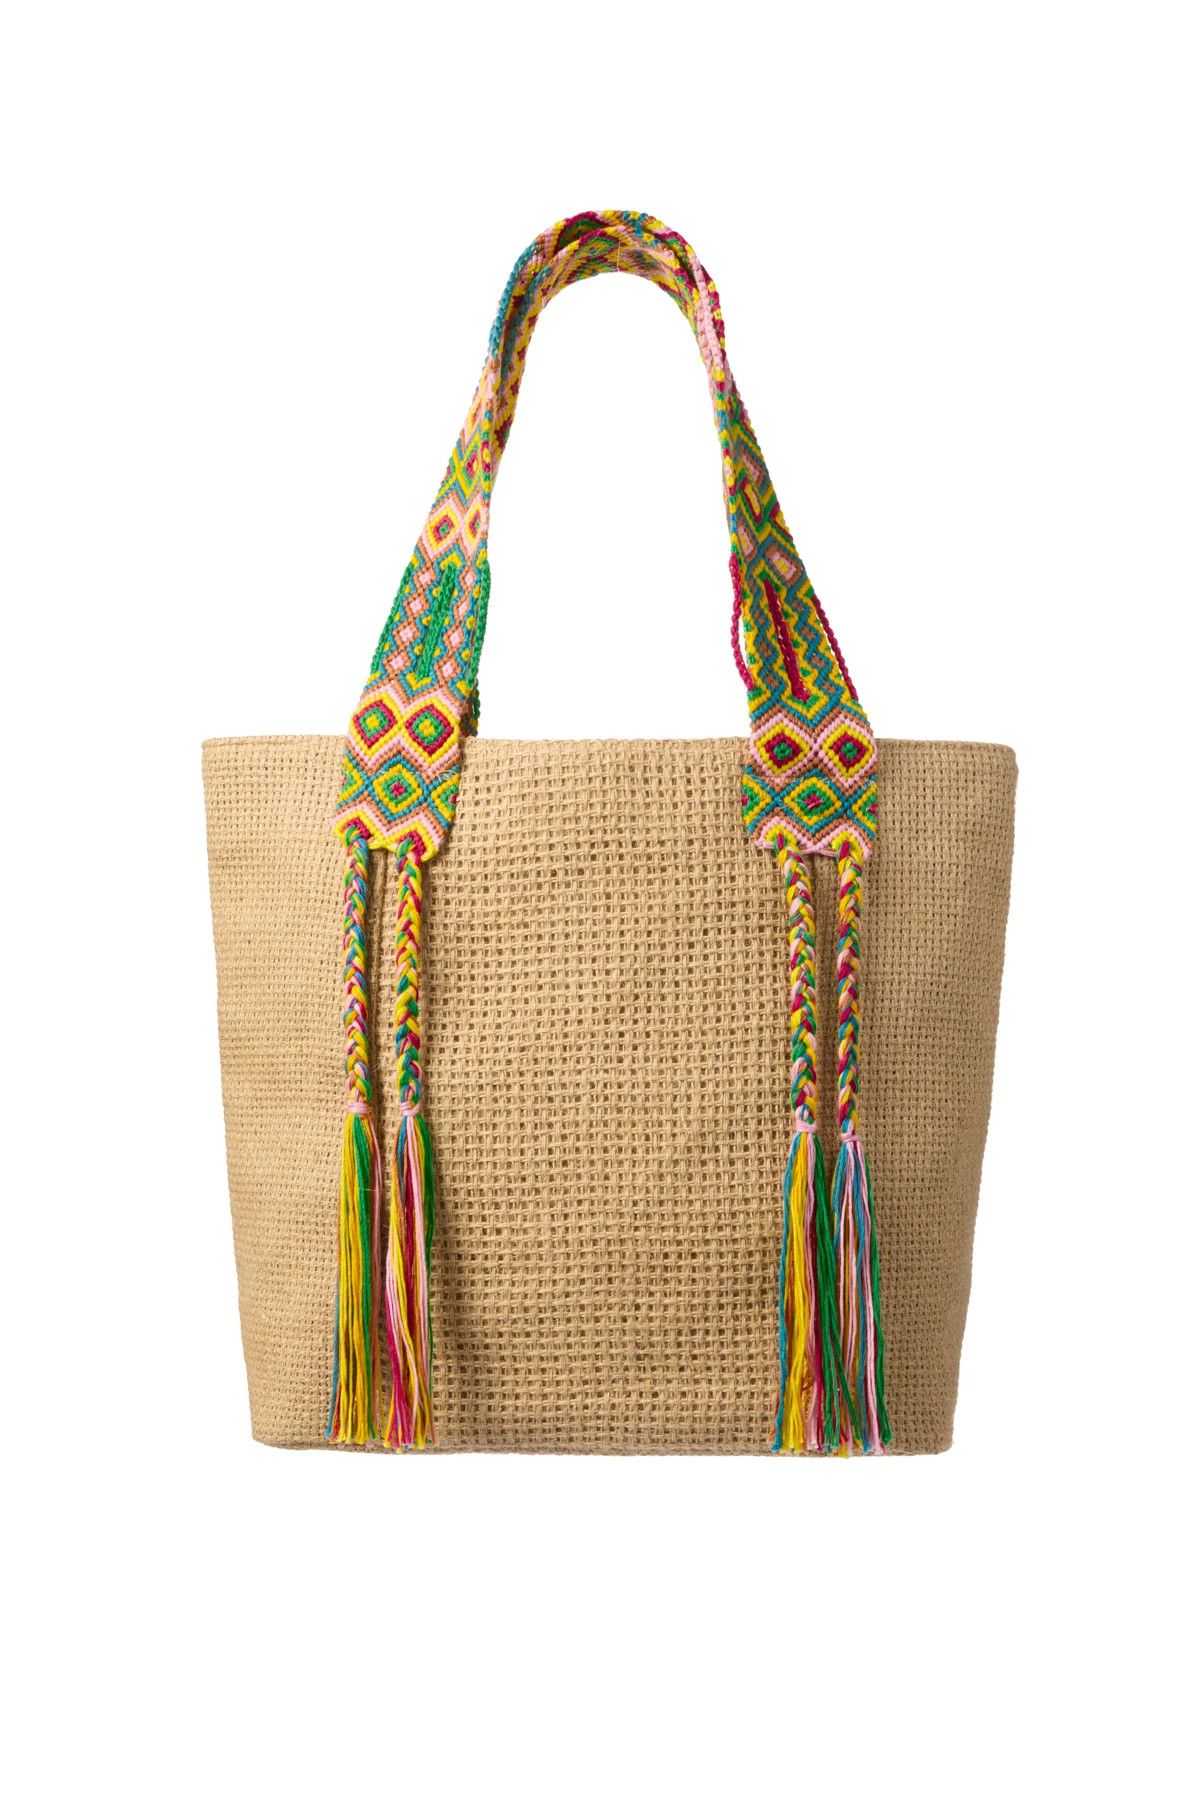 Crochet Strap Tote | Everything But Water